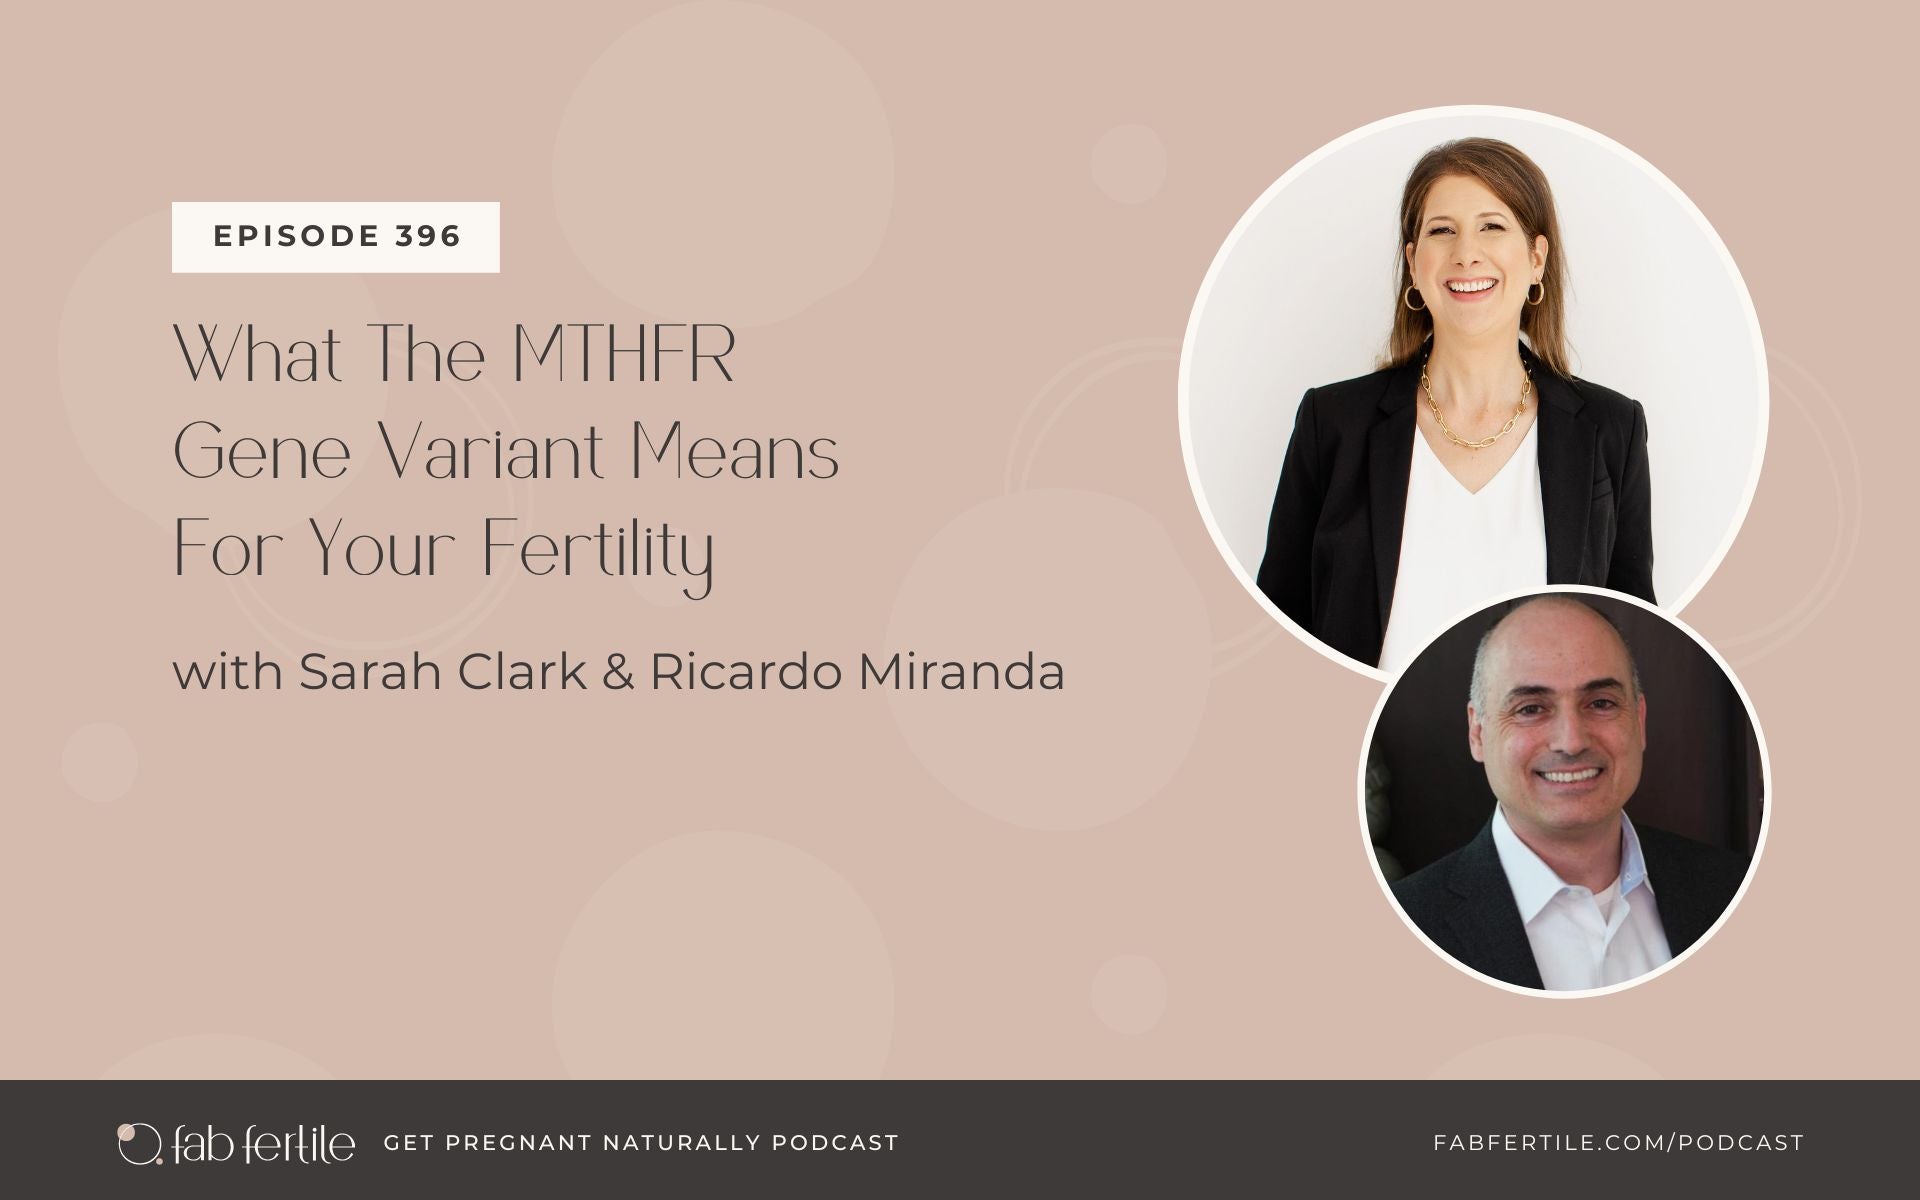 What The MTHFR Gene Variant Means For Your Fertility